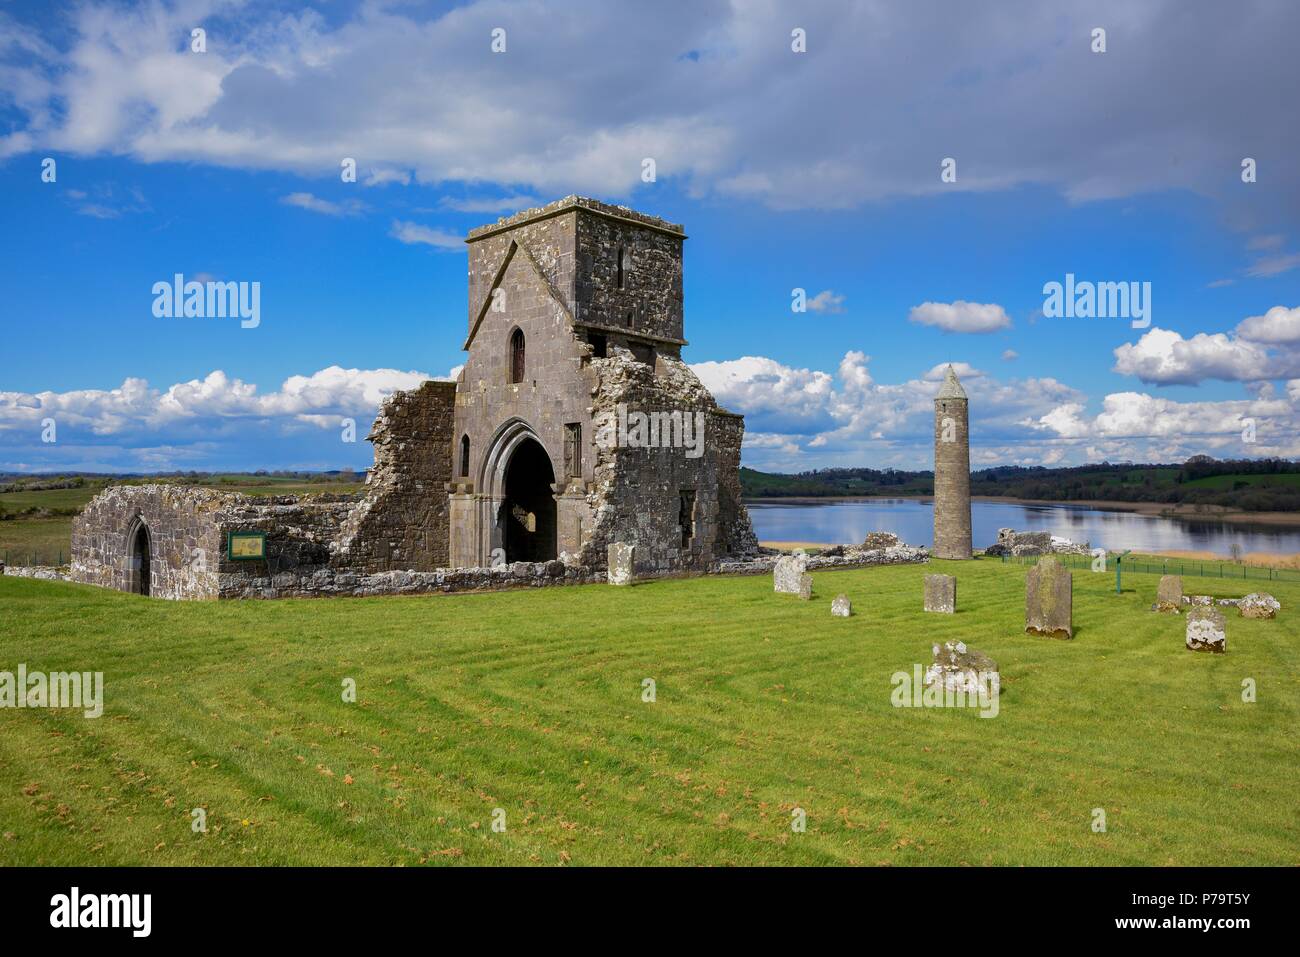 St Mary's Augustinian Priory, Augustinian Monastery St. Marien, Devenish Island, Lough Erne, Fermanagh County, Northern Ireland Stock Photo